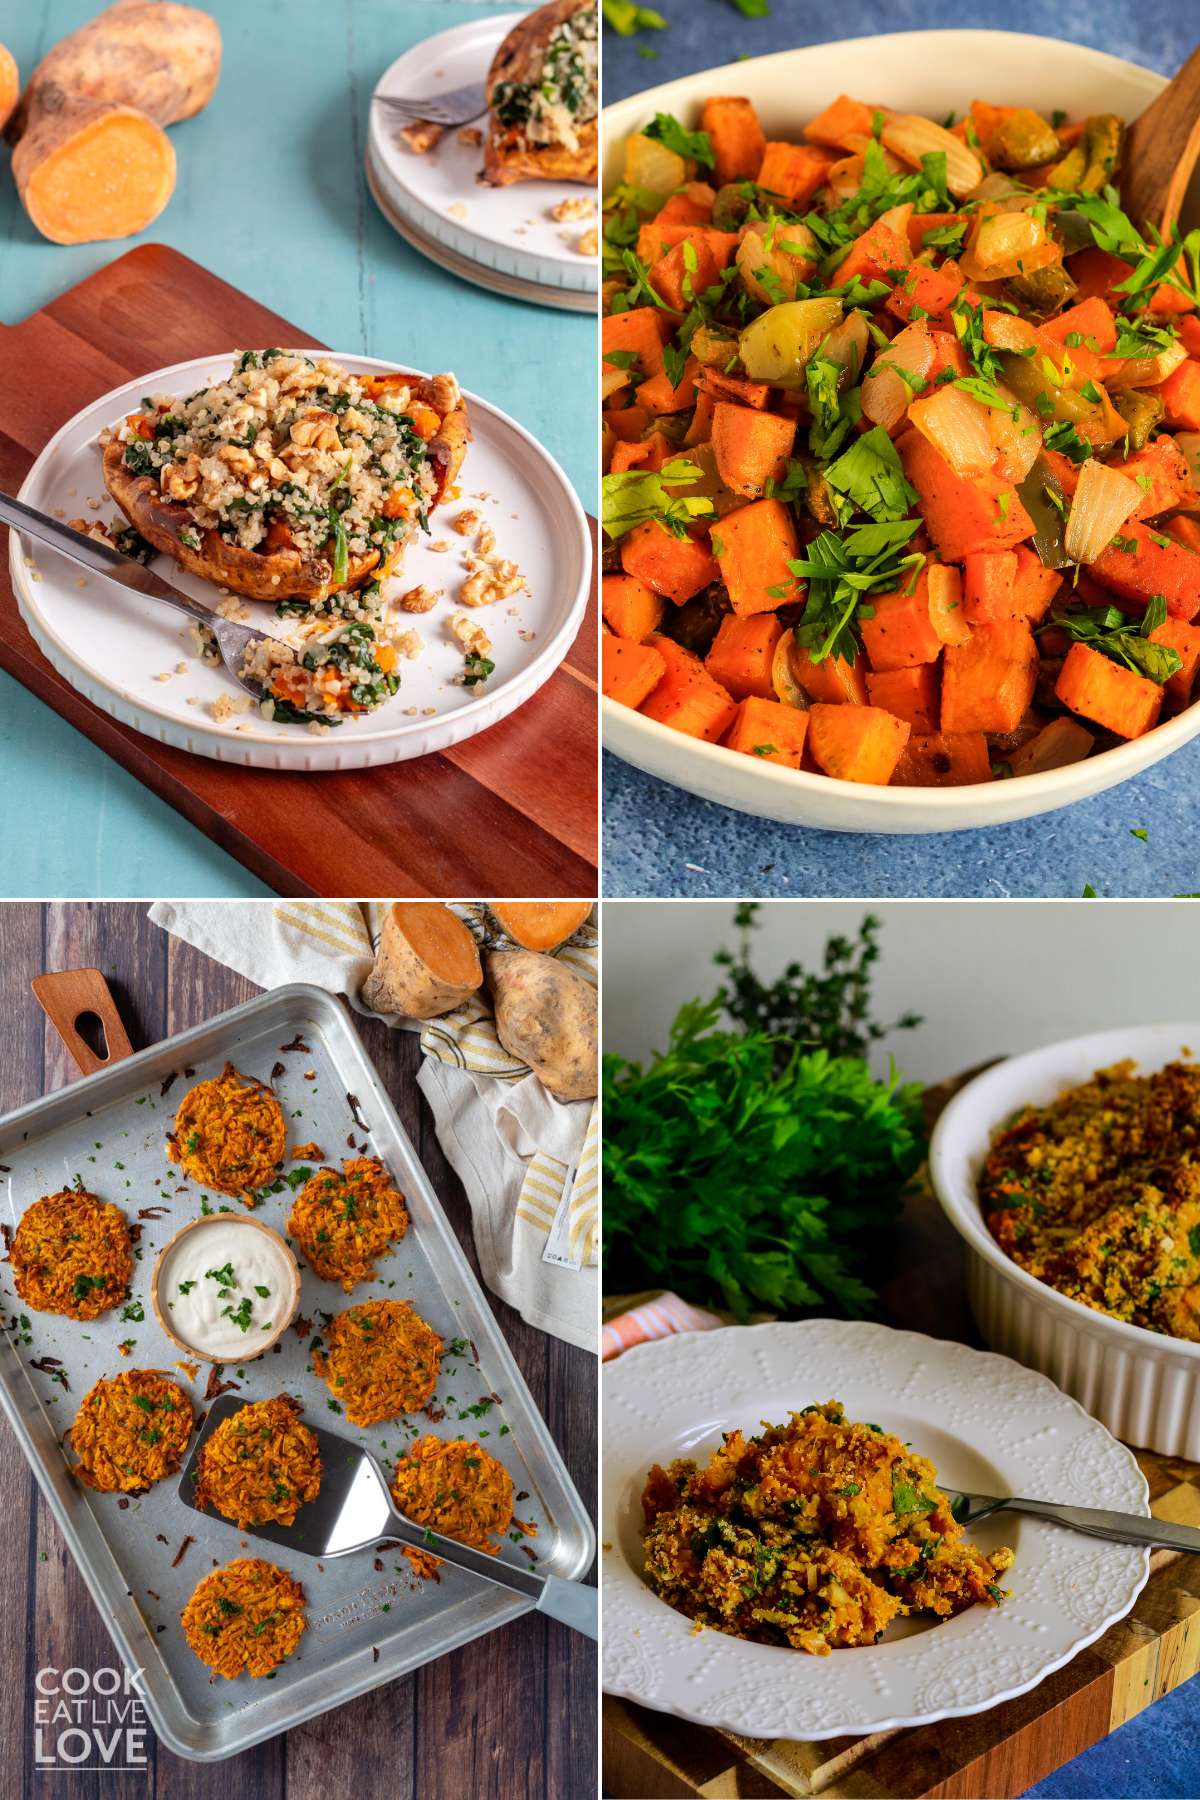 A collage of images made with sweet potatoes including a stuffed sweet potato, sweet potato hash, hash browns, and a mashed sweet potato casserole.